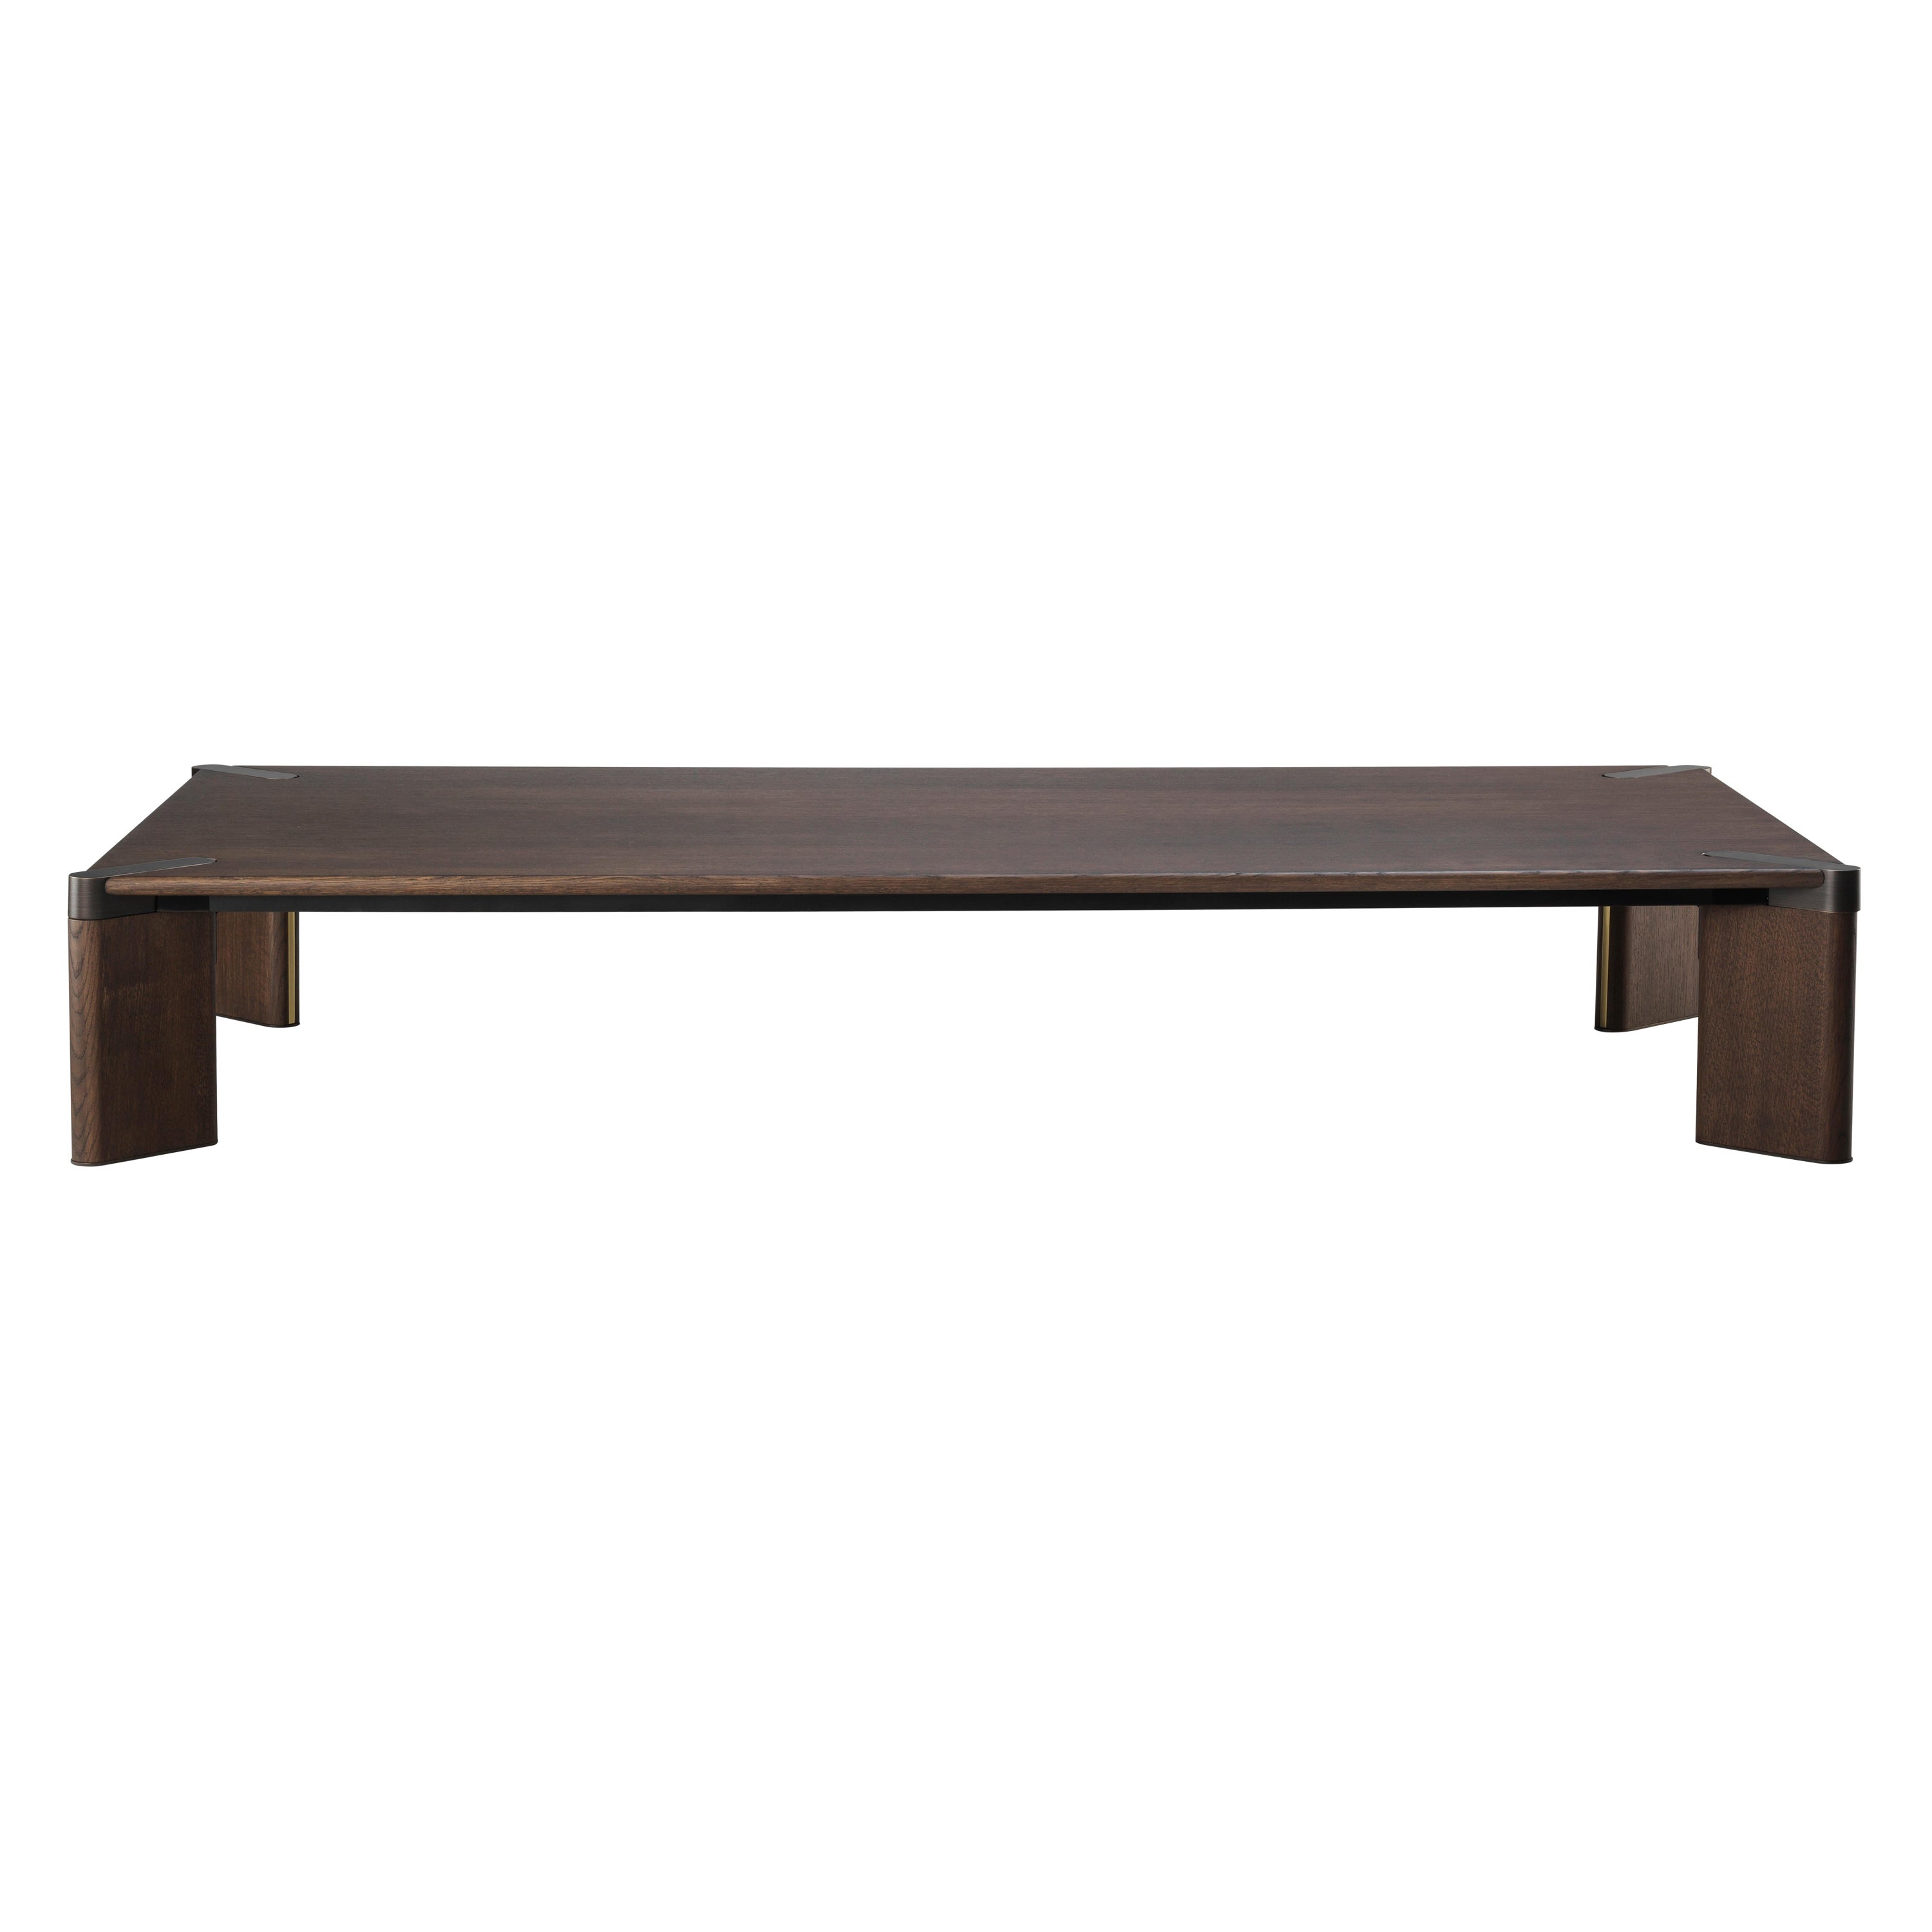 Ottanta Coffee Table, Wood and Burnished Brass Metal Parts, Made in Italy For Sale